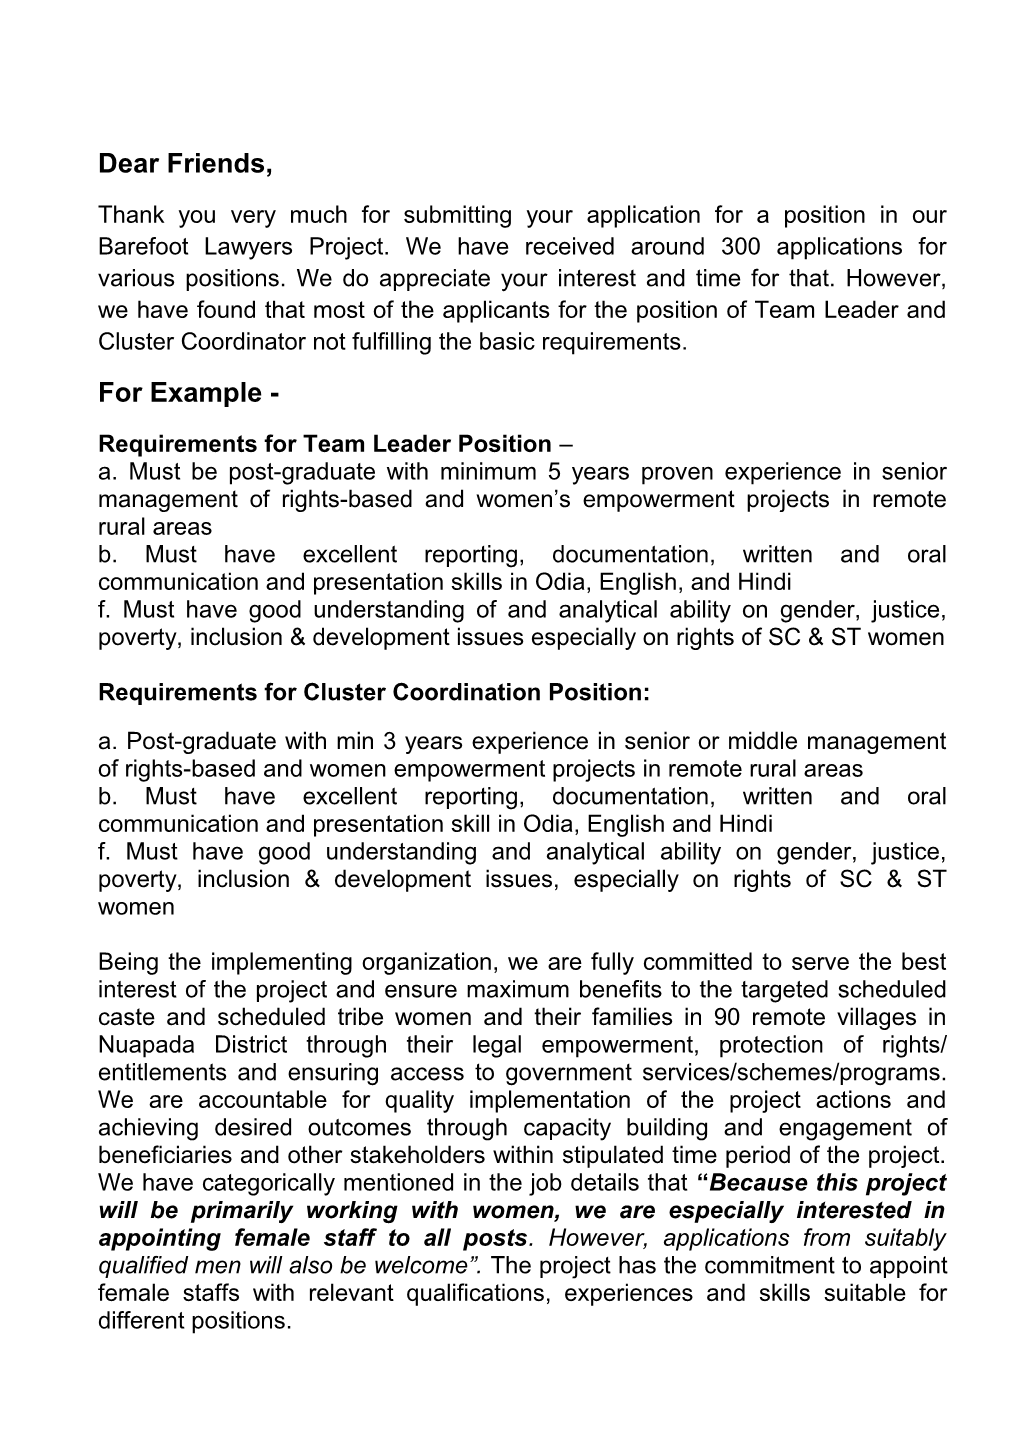 Requirements for Team Leader Position